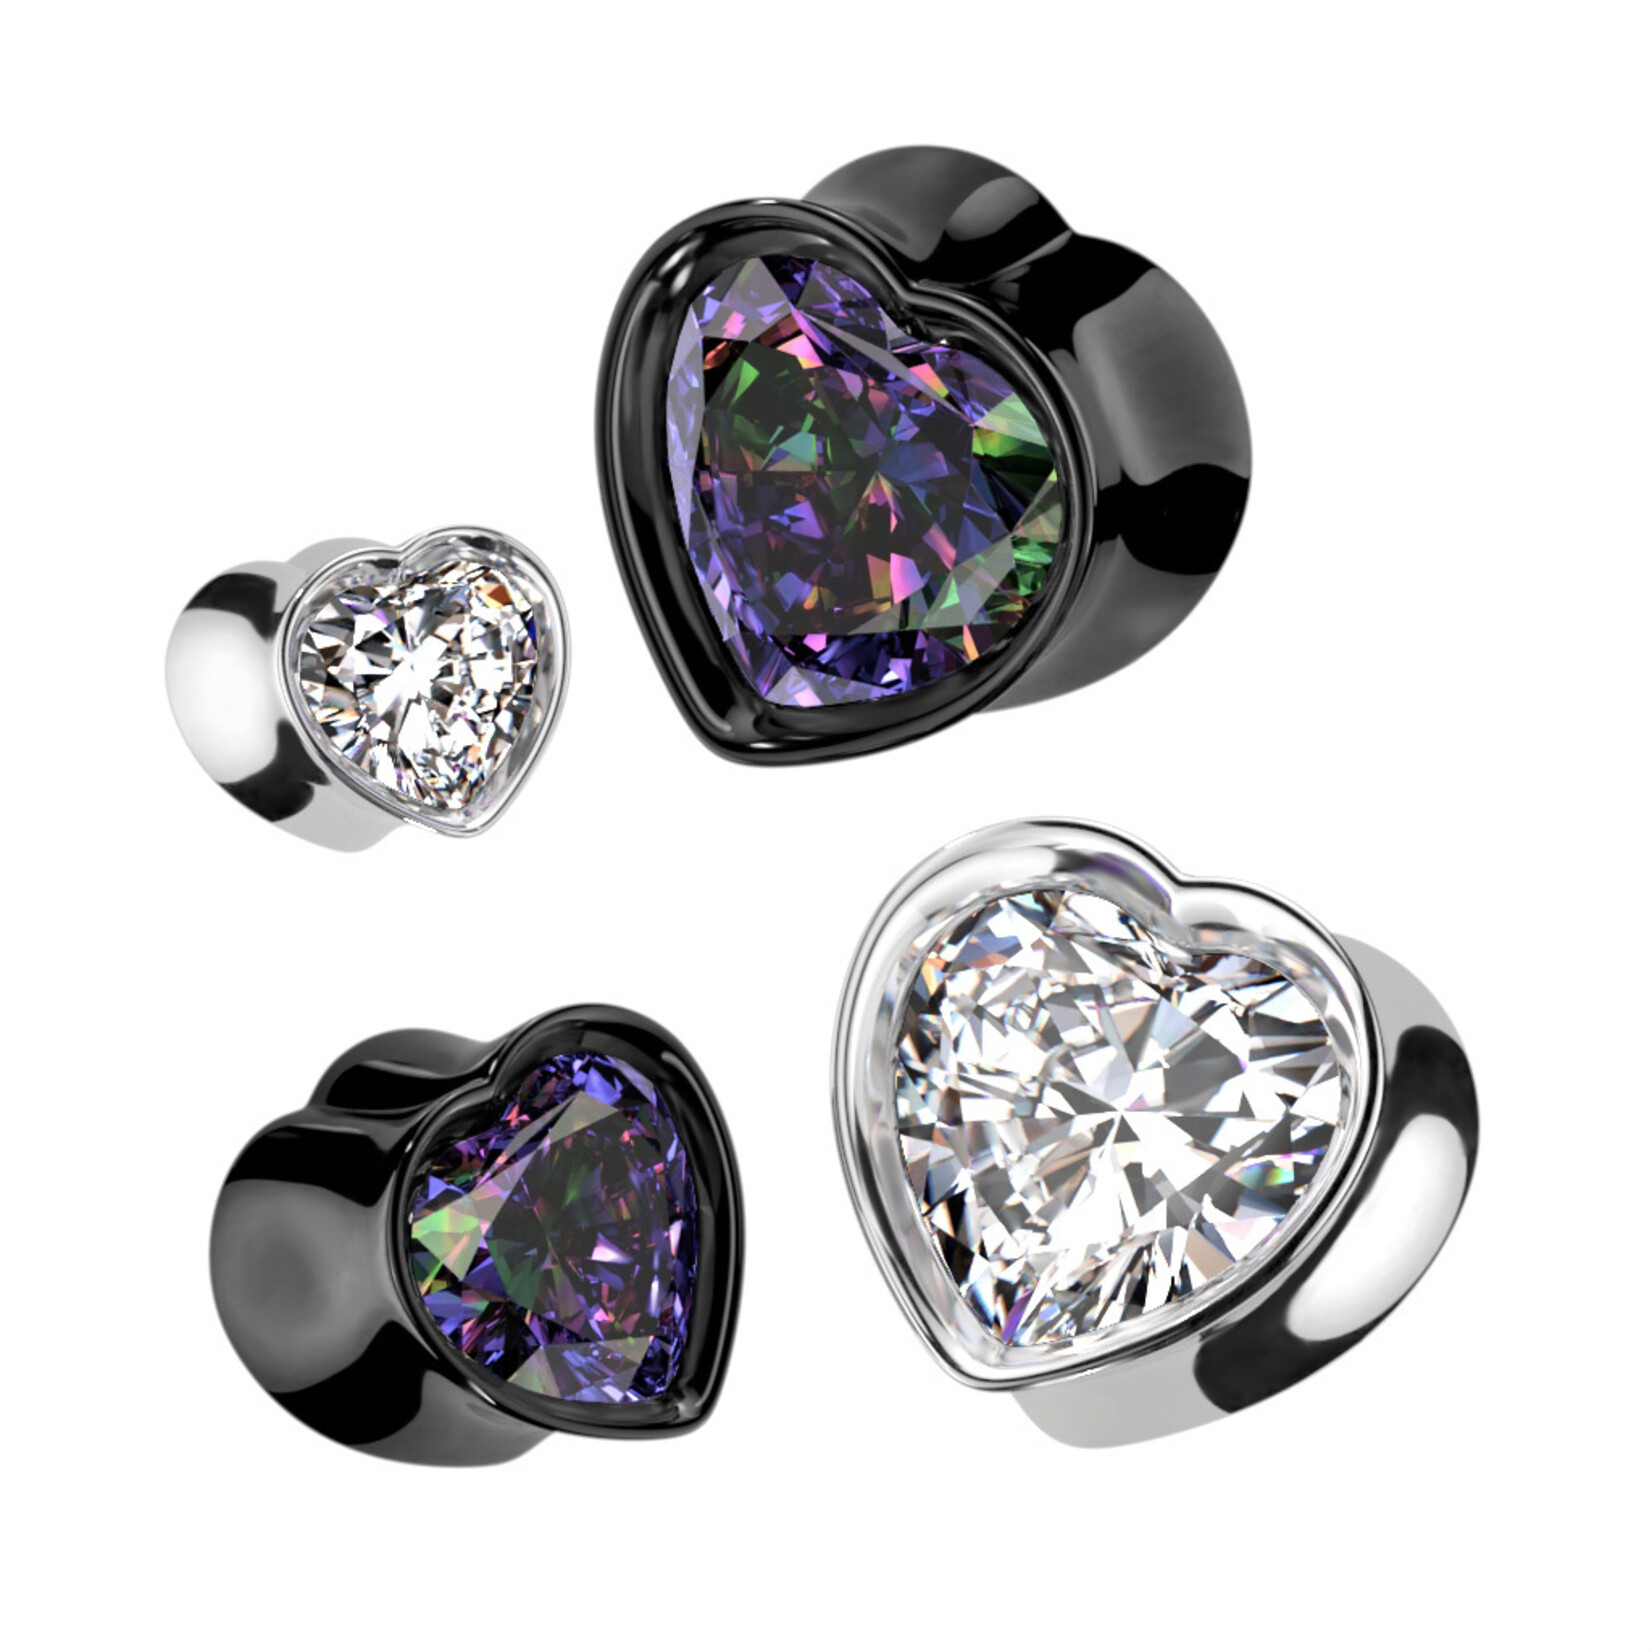 Hollywood Body Jewelry Double Flared Gem Heart Tunnel Plug Pair